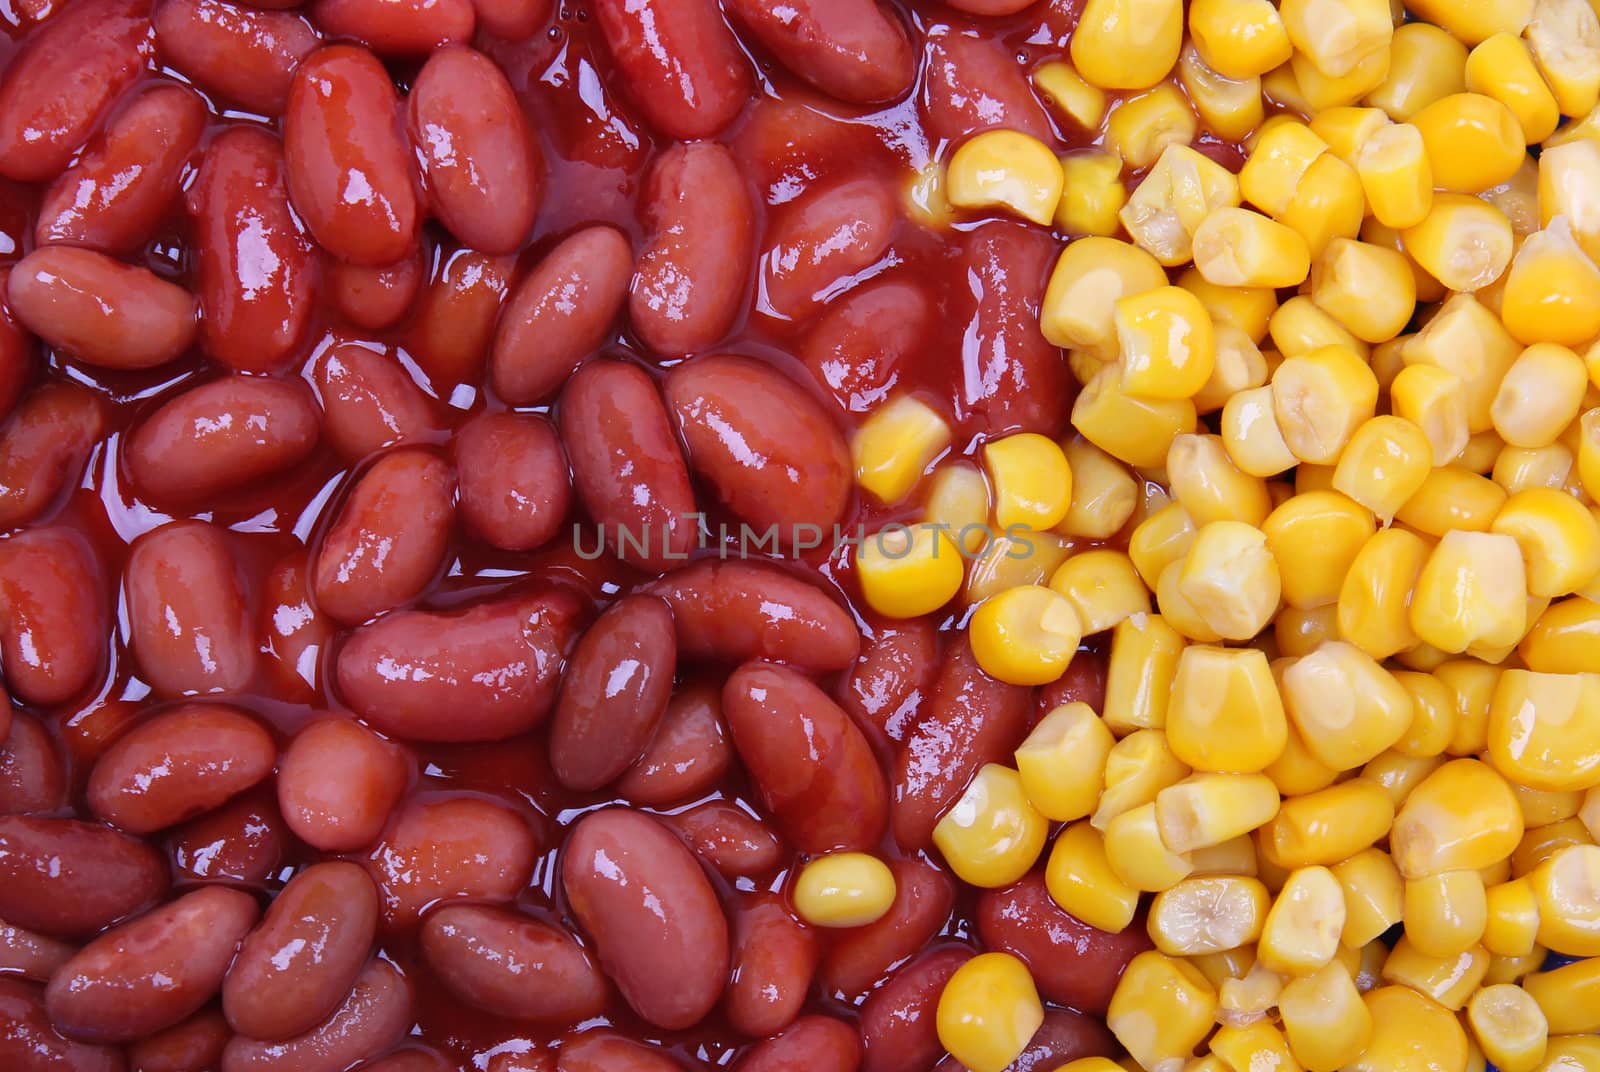 Red string bean in tomato sauce and yellow sweet corn can use as food background 